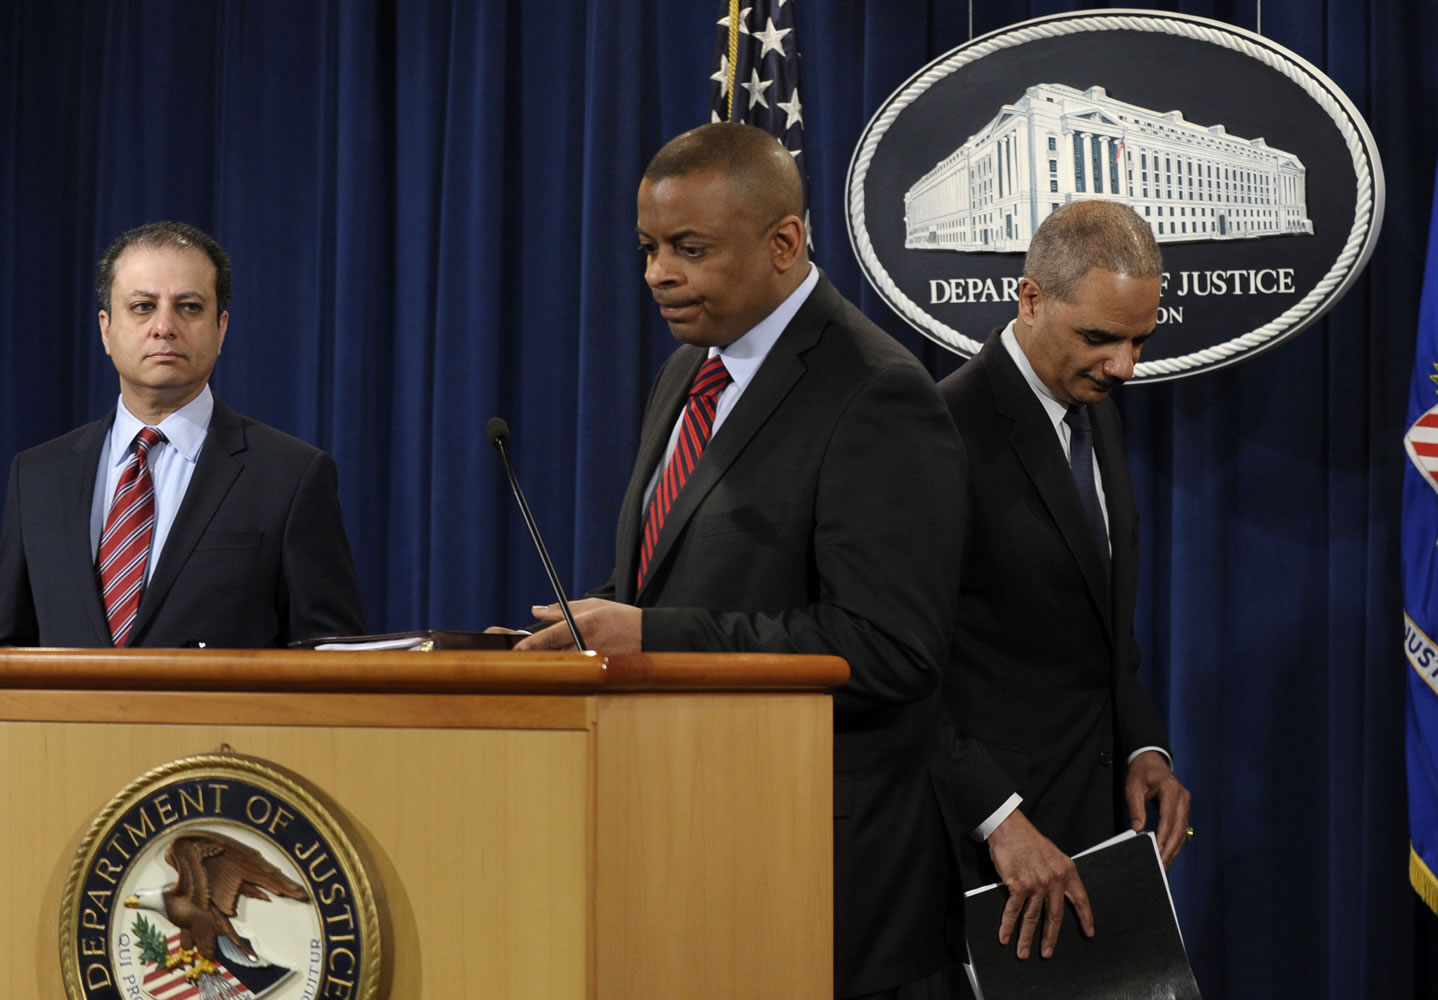 Attorney General Eric Holder, right, changes places with Transportation Secretary Anthony Foxx, center, during a news conference at the Justice Department in Washington on Wednesday.